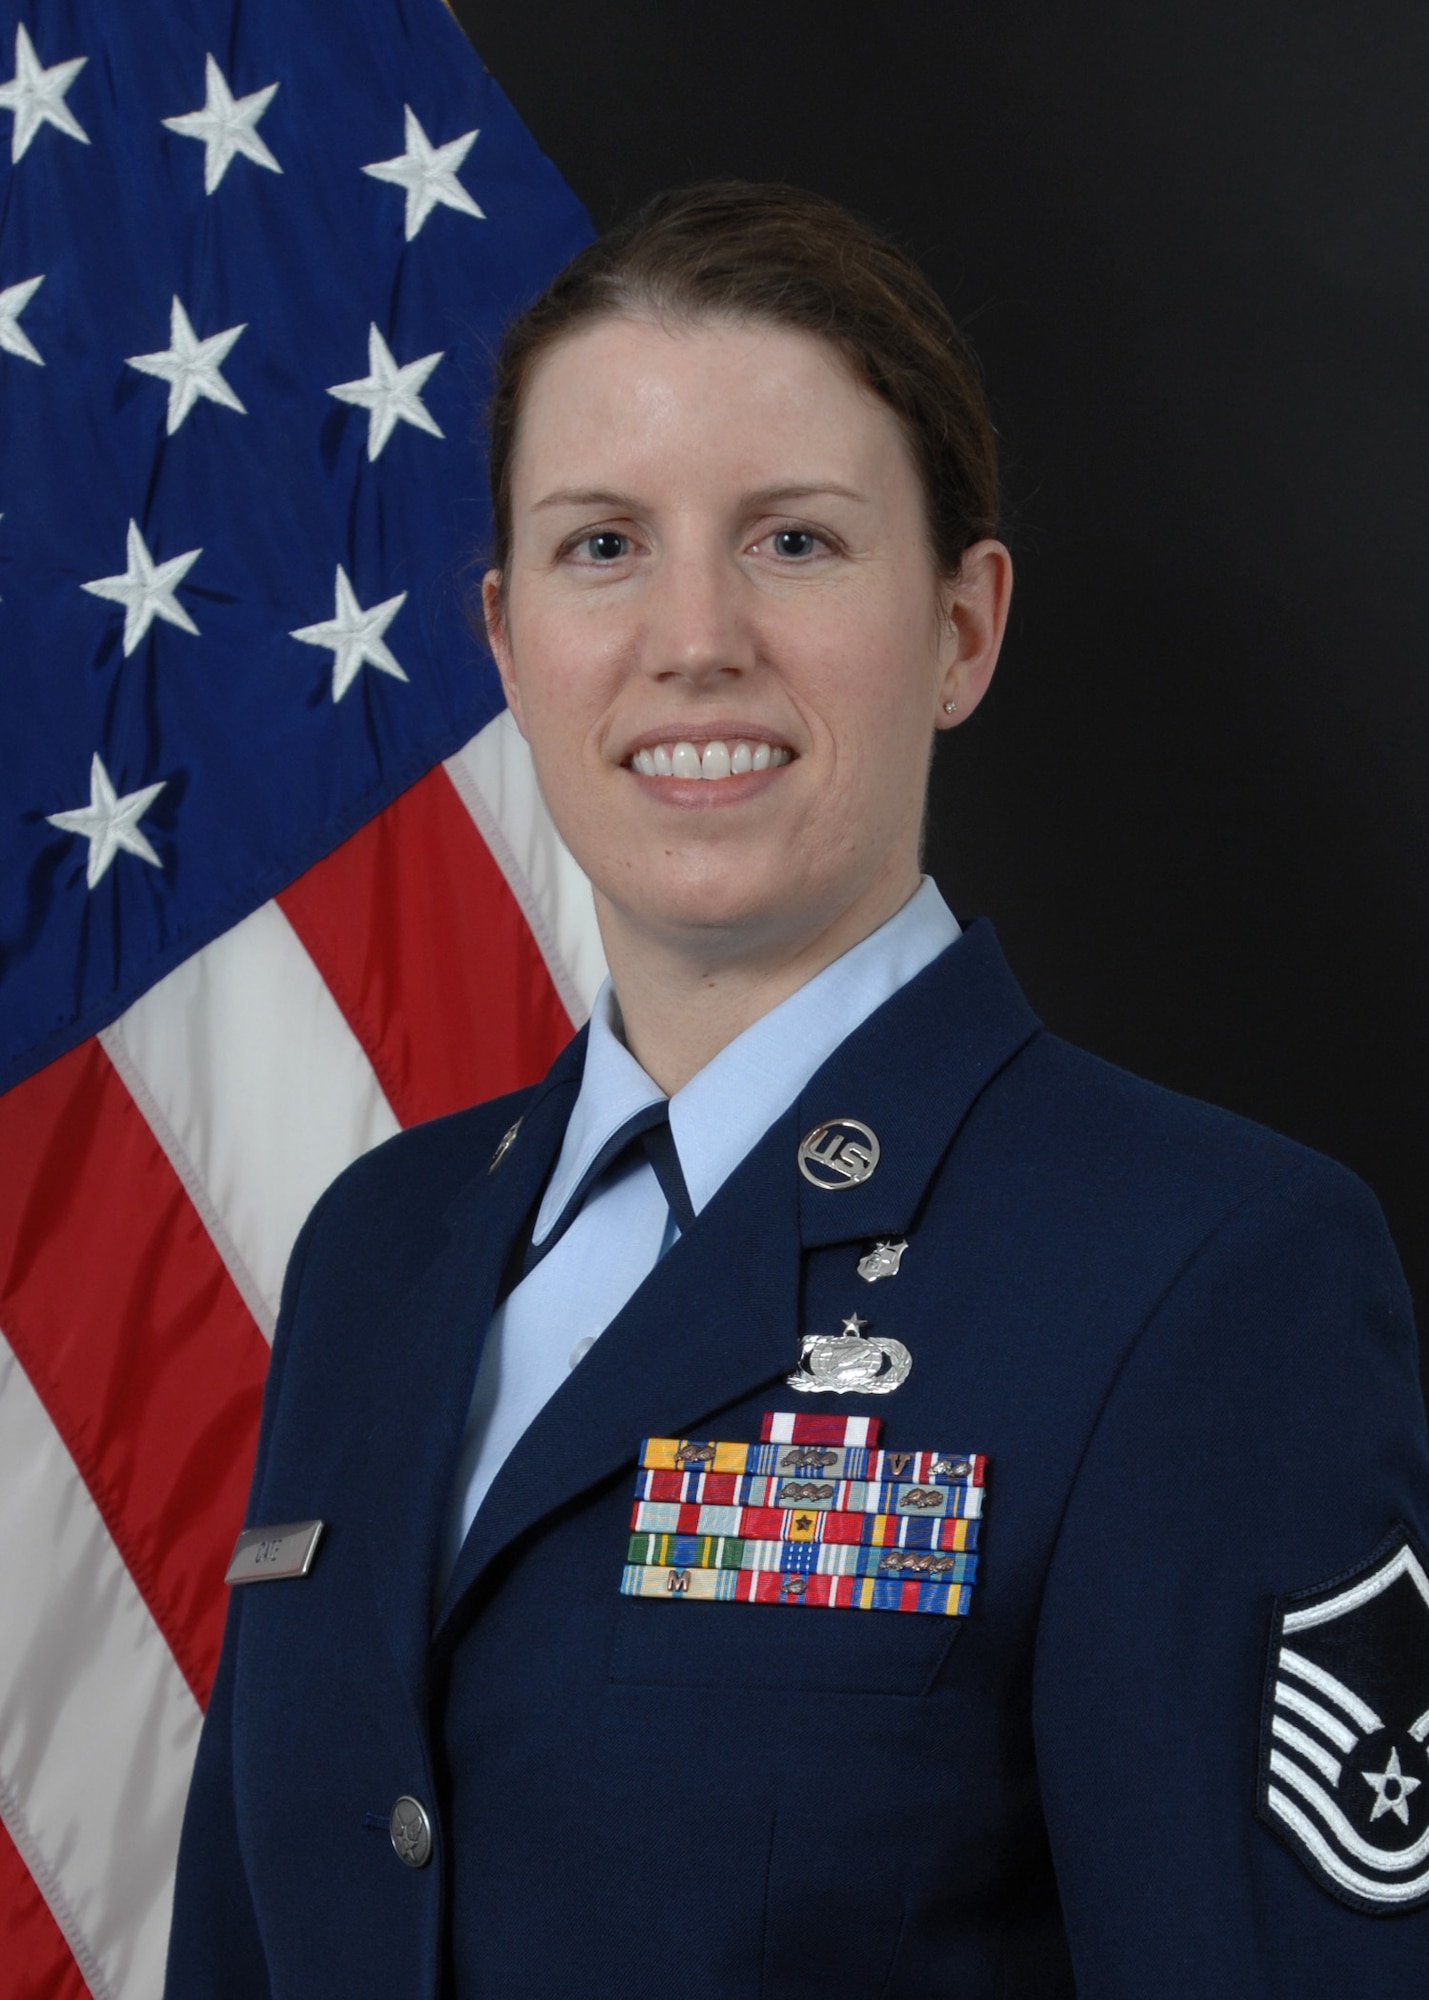 EIELSON AIR FORCE BASE, Alaska--Master Sgt. Carmen Cate, 354th Medical Operations Squadron, Senior Non-Commissioned Officer of the Year.